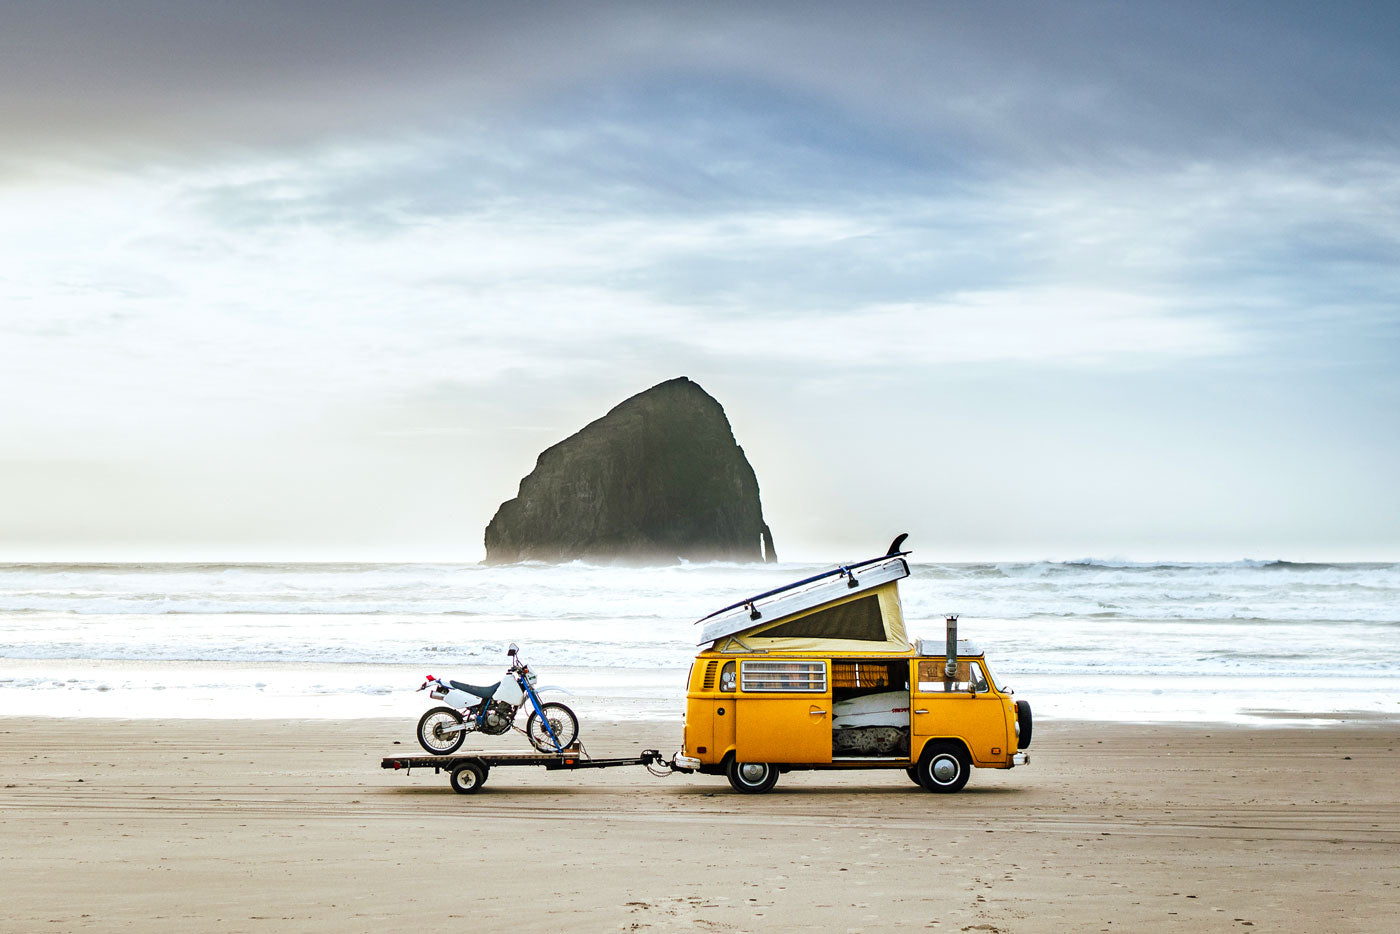 A van parked on a deserted beach. A motorcycle is parked on a hanger attached to the van. In the background is a rock formation in the ocean. (Photo: James Barkman)